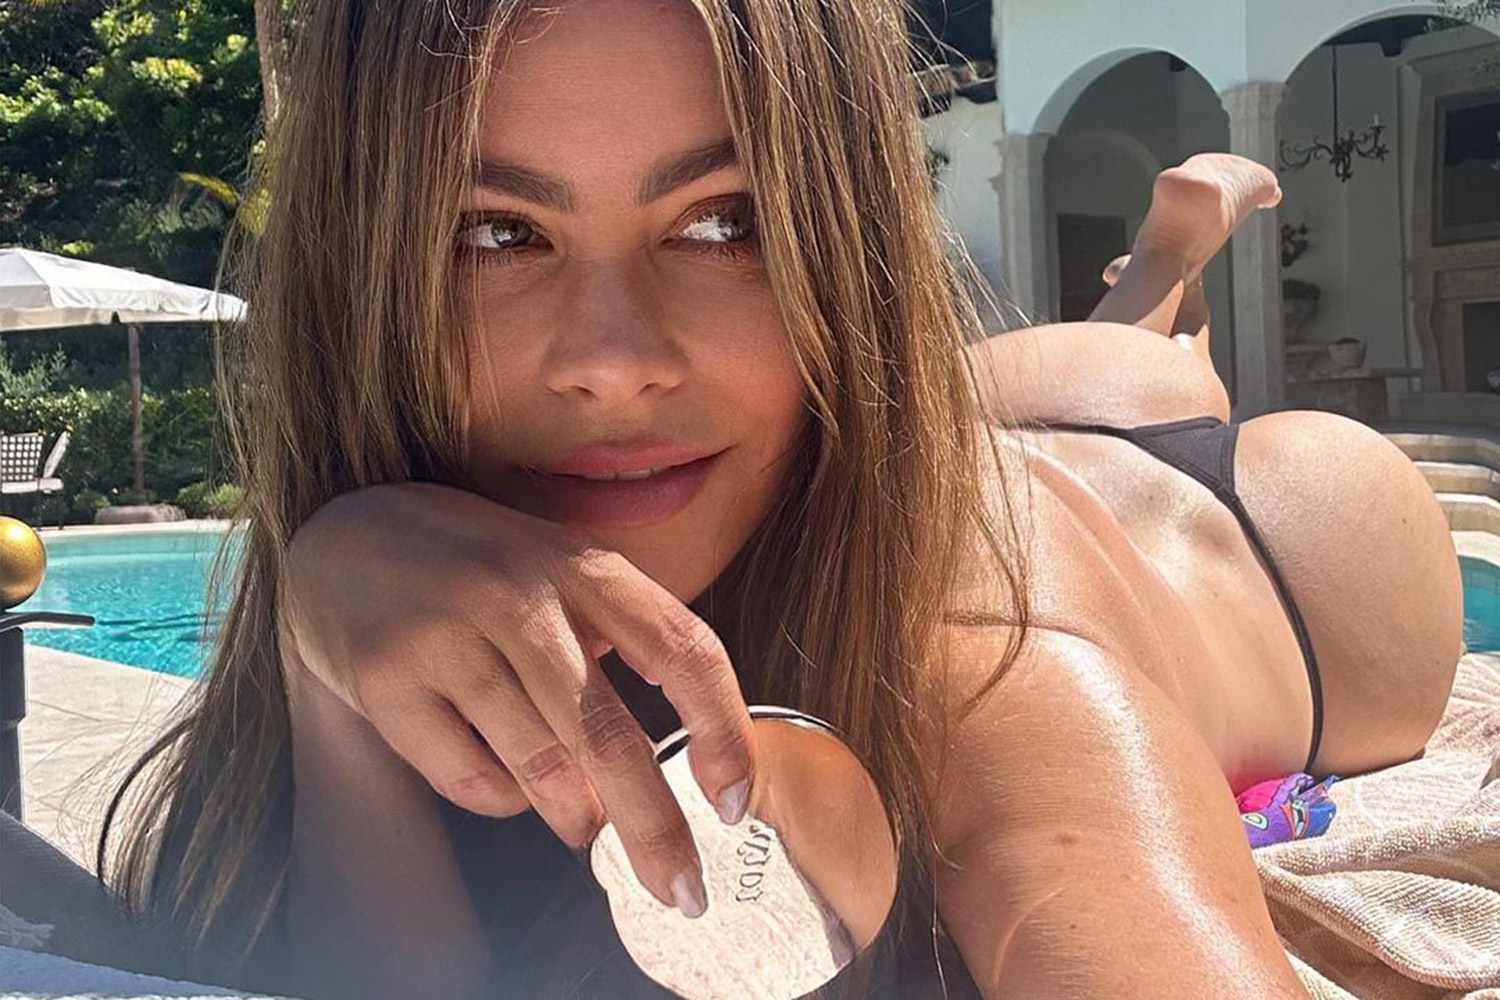 anna mcfarland recommends sofia vergara butt naked pic